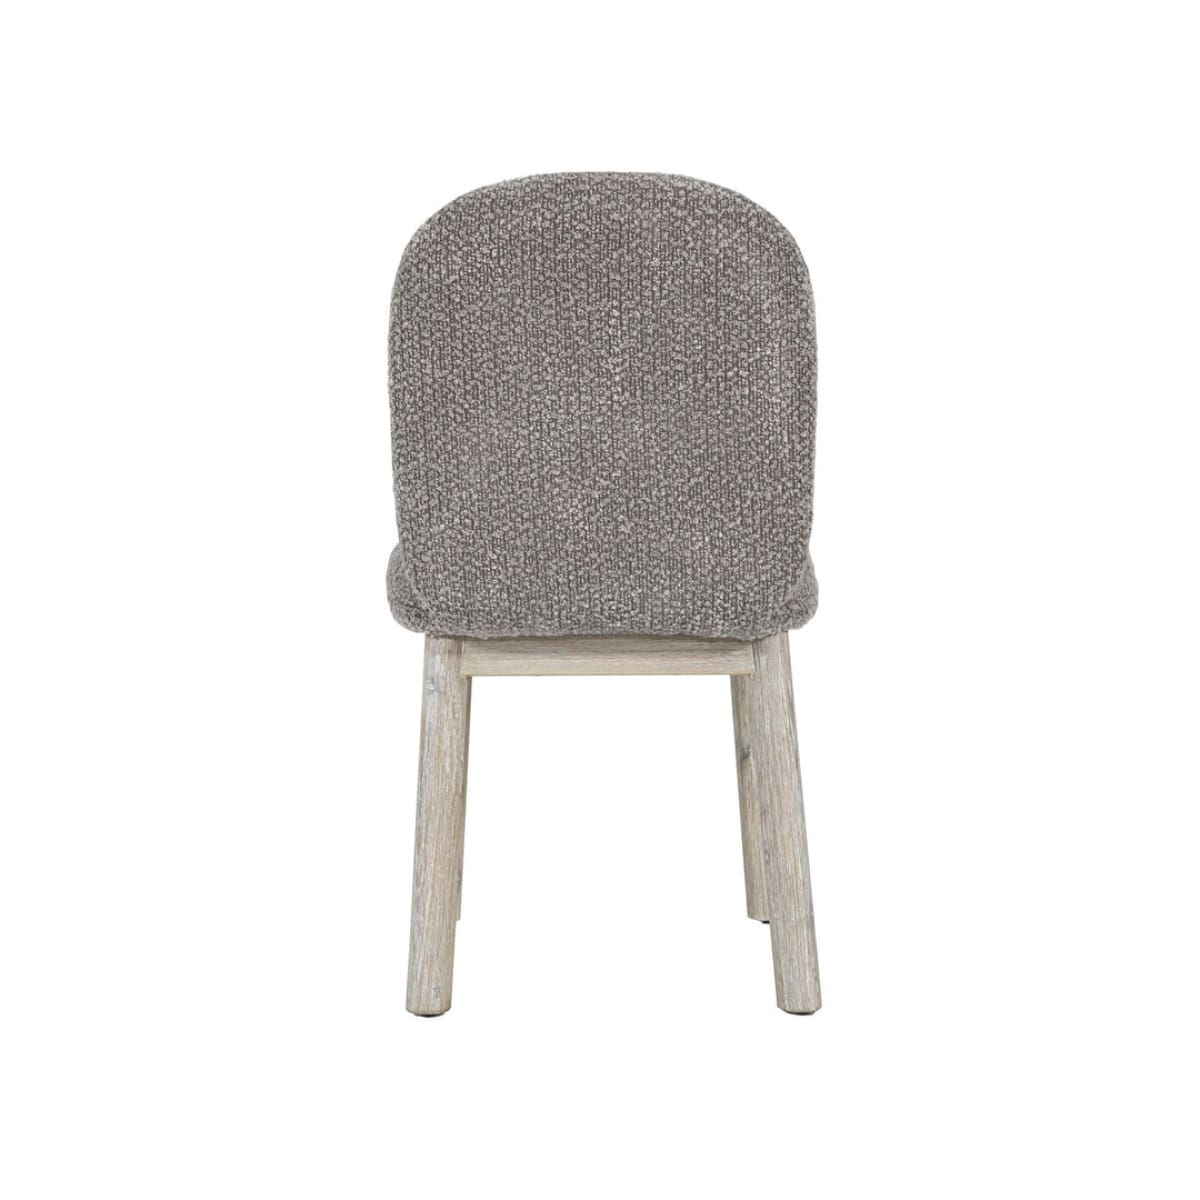 Oasis Dining Chair - Oatmeal - lh-import-dining-chairs